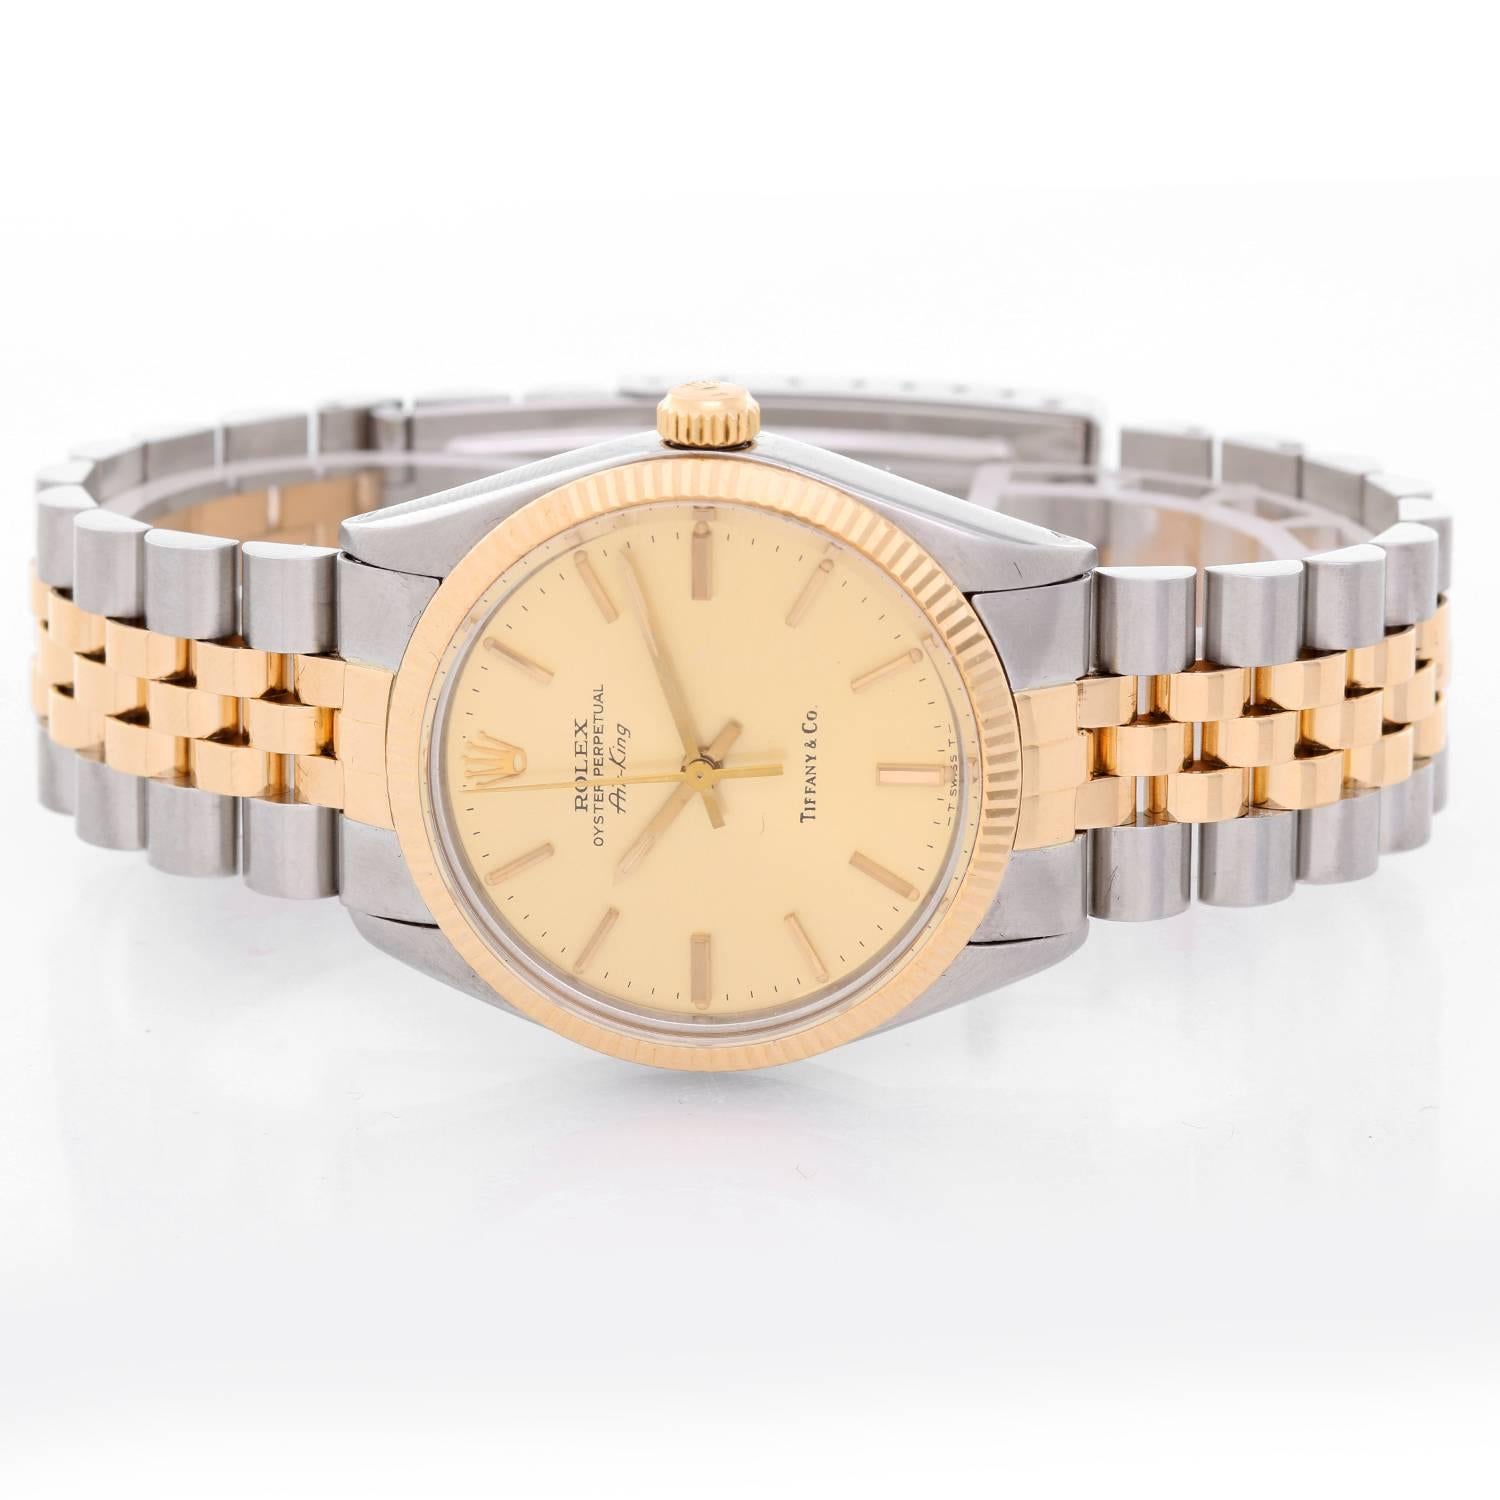 Rolex Air-king  Retail by Tiffany & Co.  Two- Tone Watch 5501 -  Automatic. Stainless Steel ( 34 mm ). Champagne dial with stick hour markers; Tiffany & Co logo on dial. Jubilee bracelet. Pre-owned with Tiffany & Co. box and books.